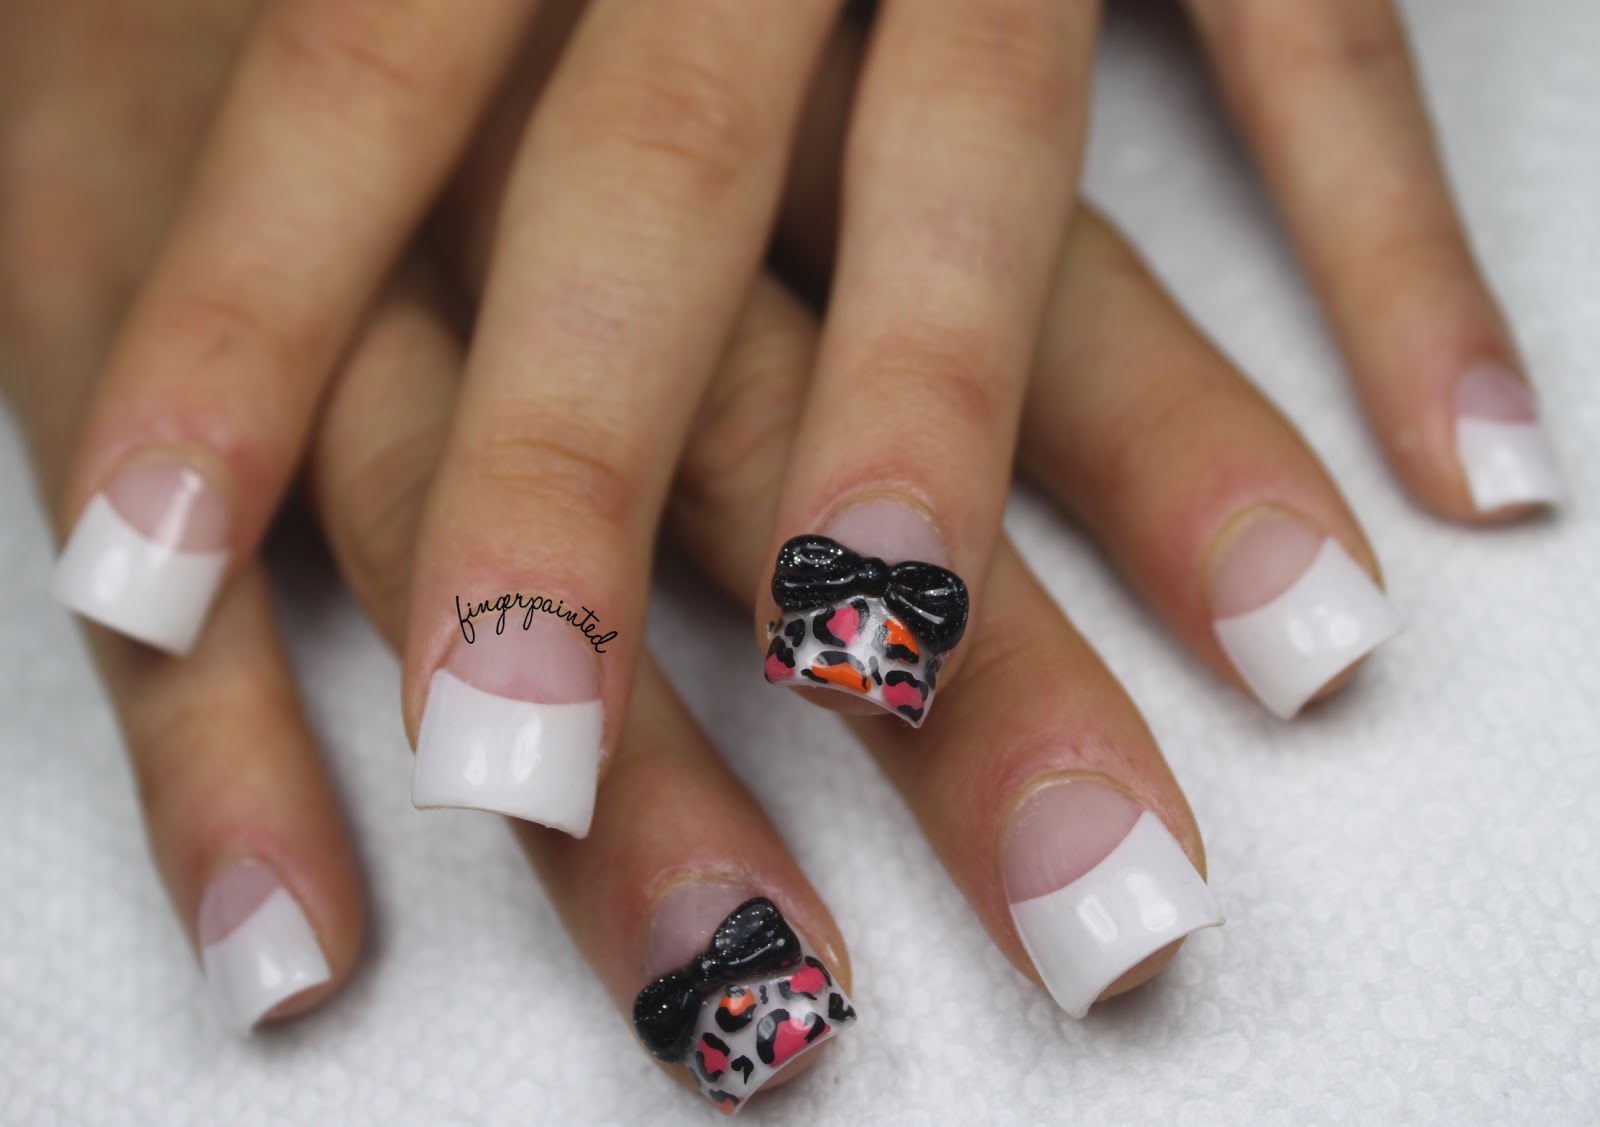 2. "Pointy Nail Designs with 3D Bows and Rhinestones" - wide 8